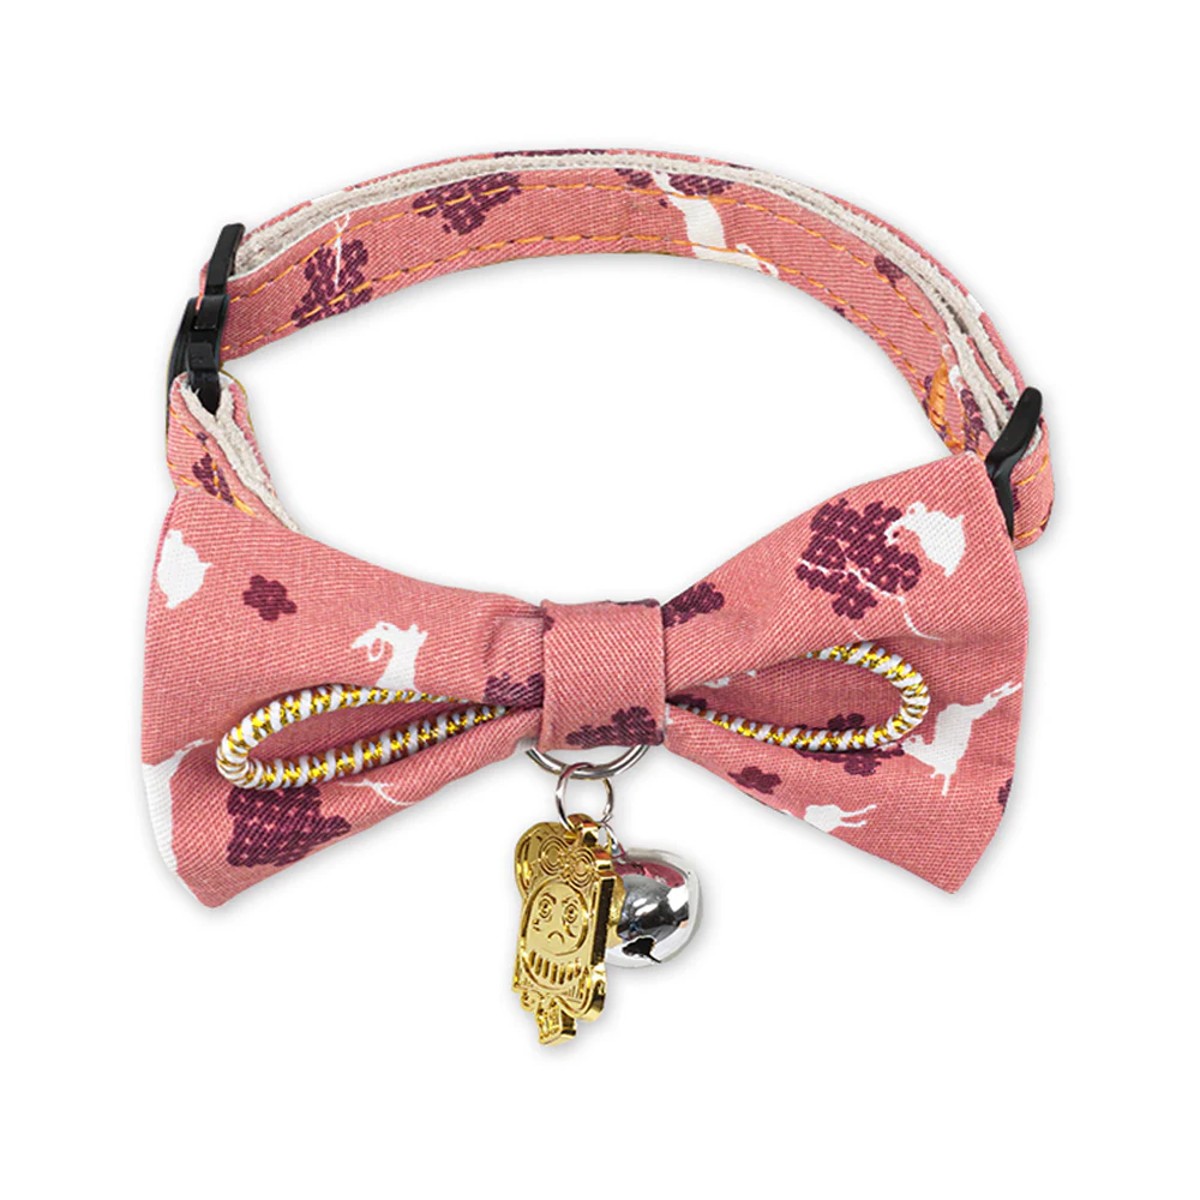 Pet Life Touchcat Glampurr Designer Cat Collar with Bow - Pink